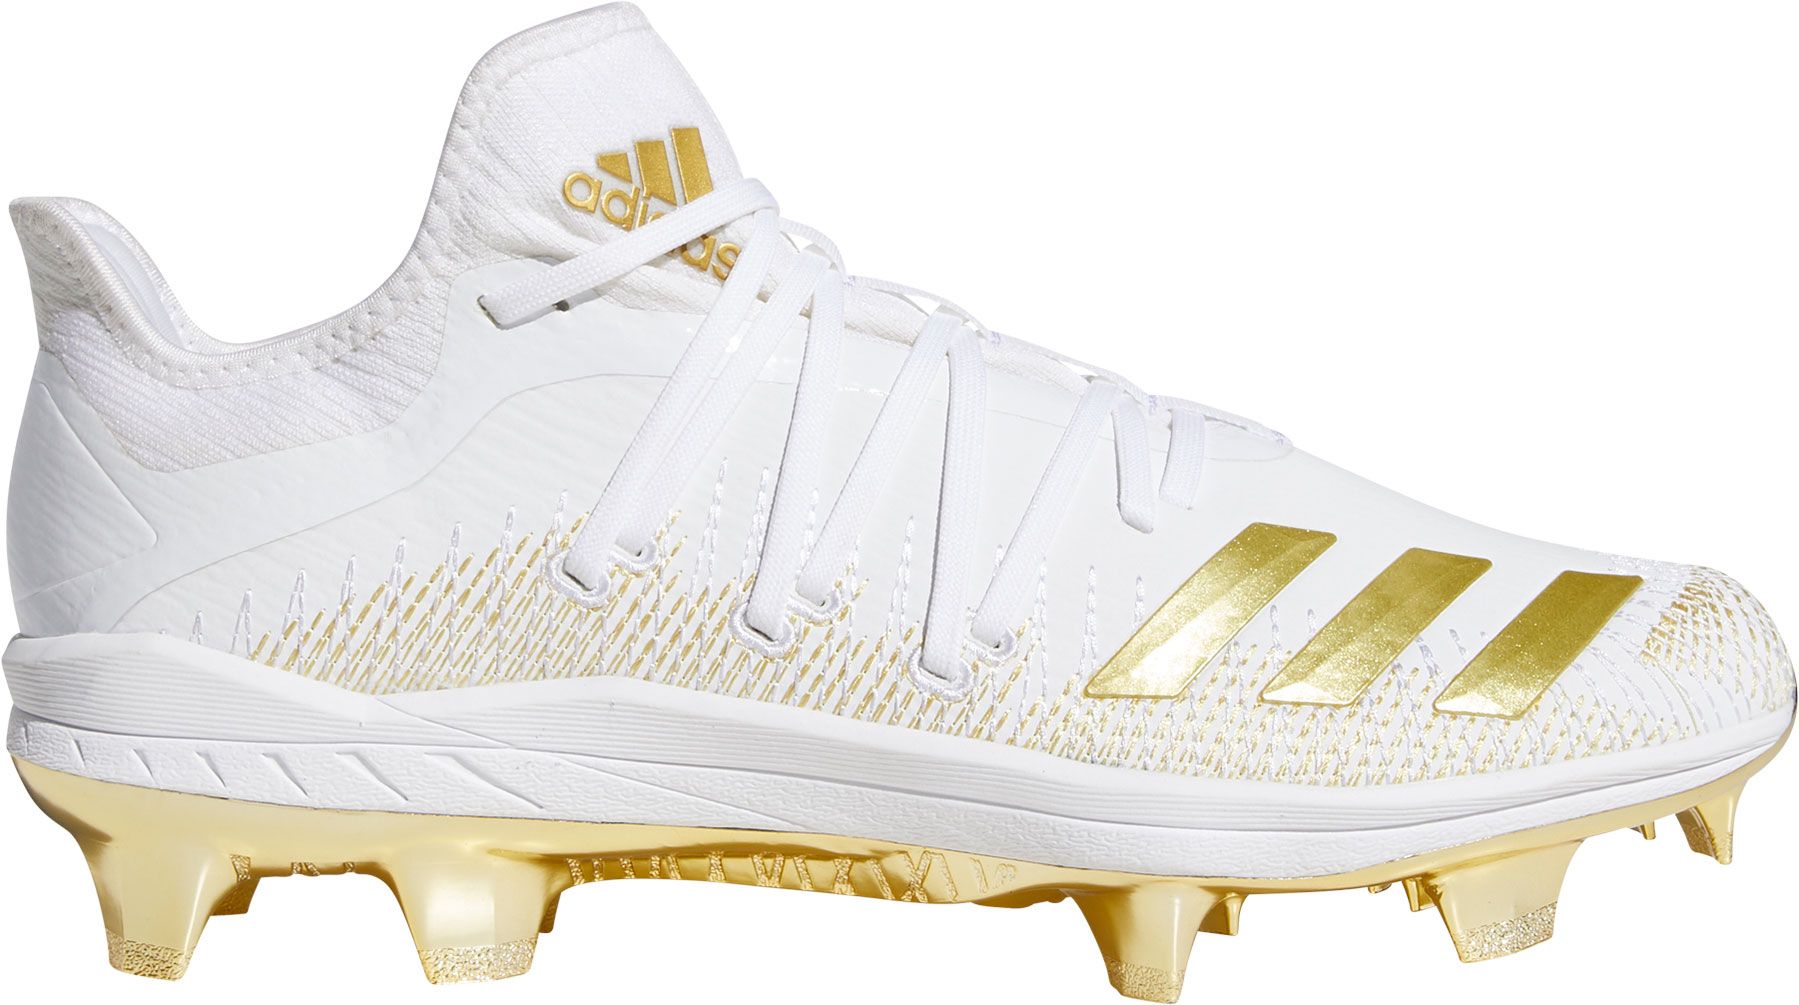 adidas rubber cleats